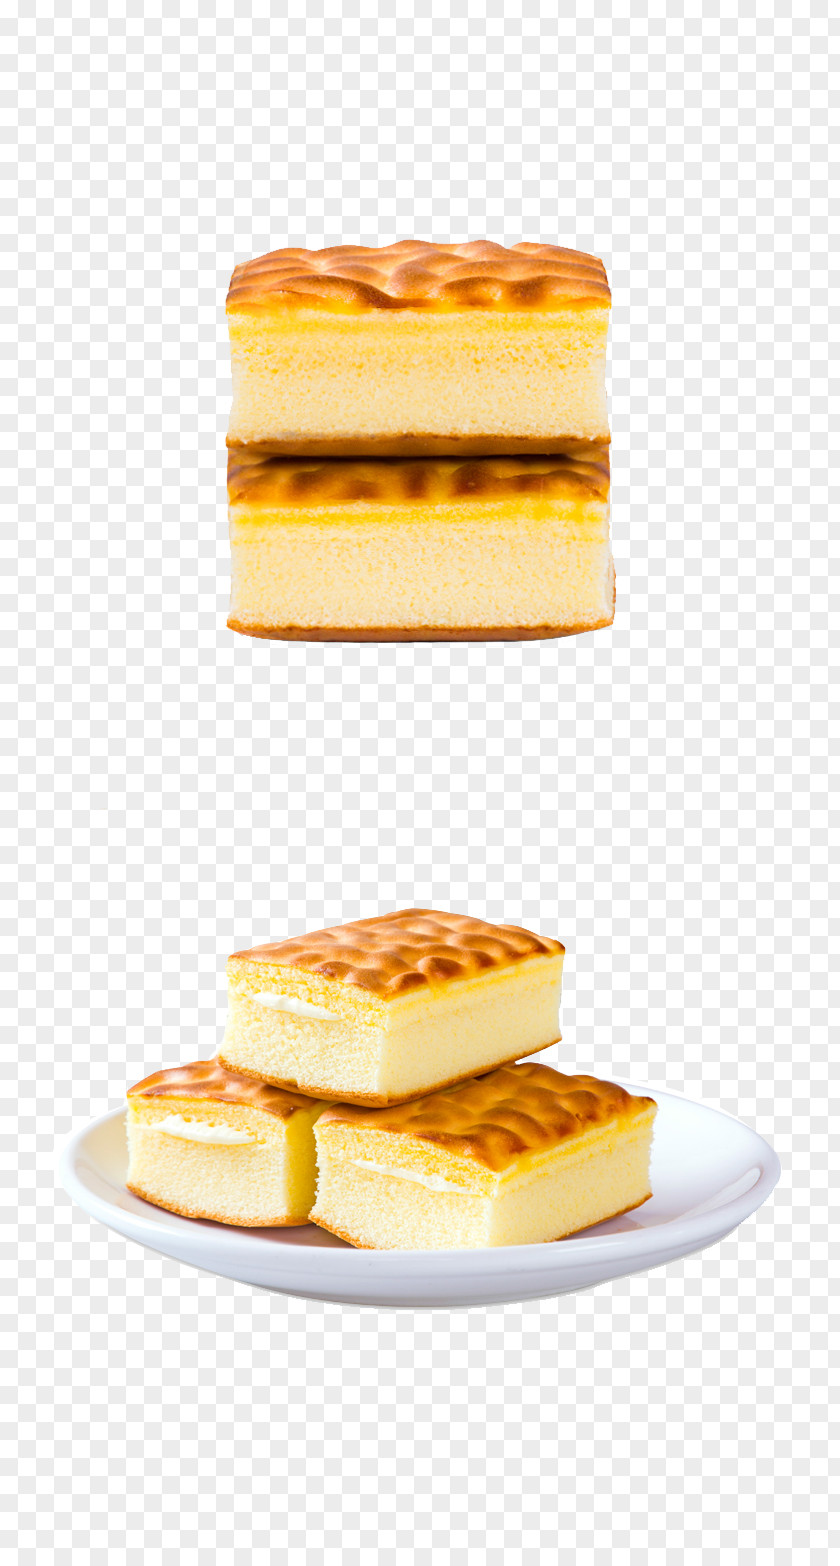 Tiger Cake Dim Sum Breakfast Bread Pastry PNG